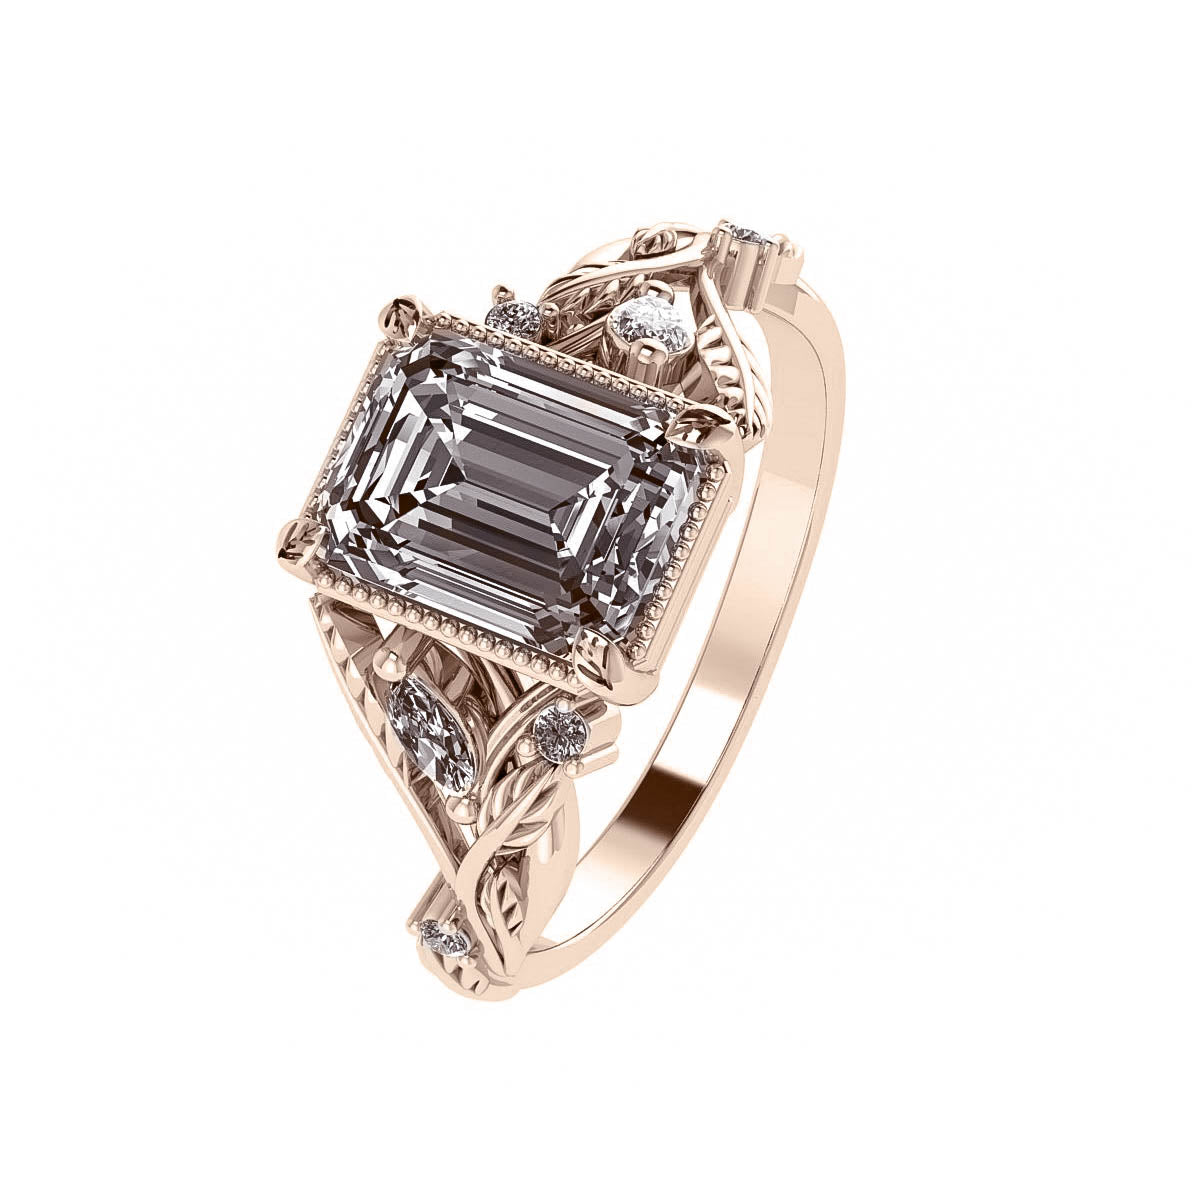 Patricia asymmetric | engagement ring setting with emerald cut gemstone 8x6 mm - Eden Garden Jewelry™